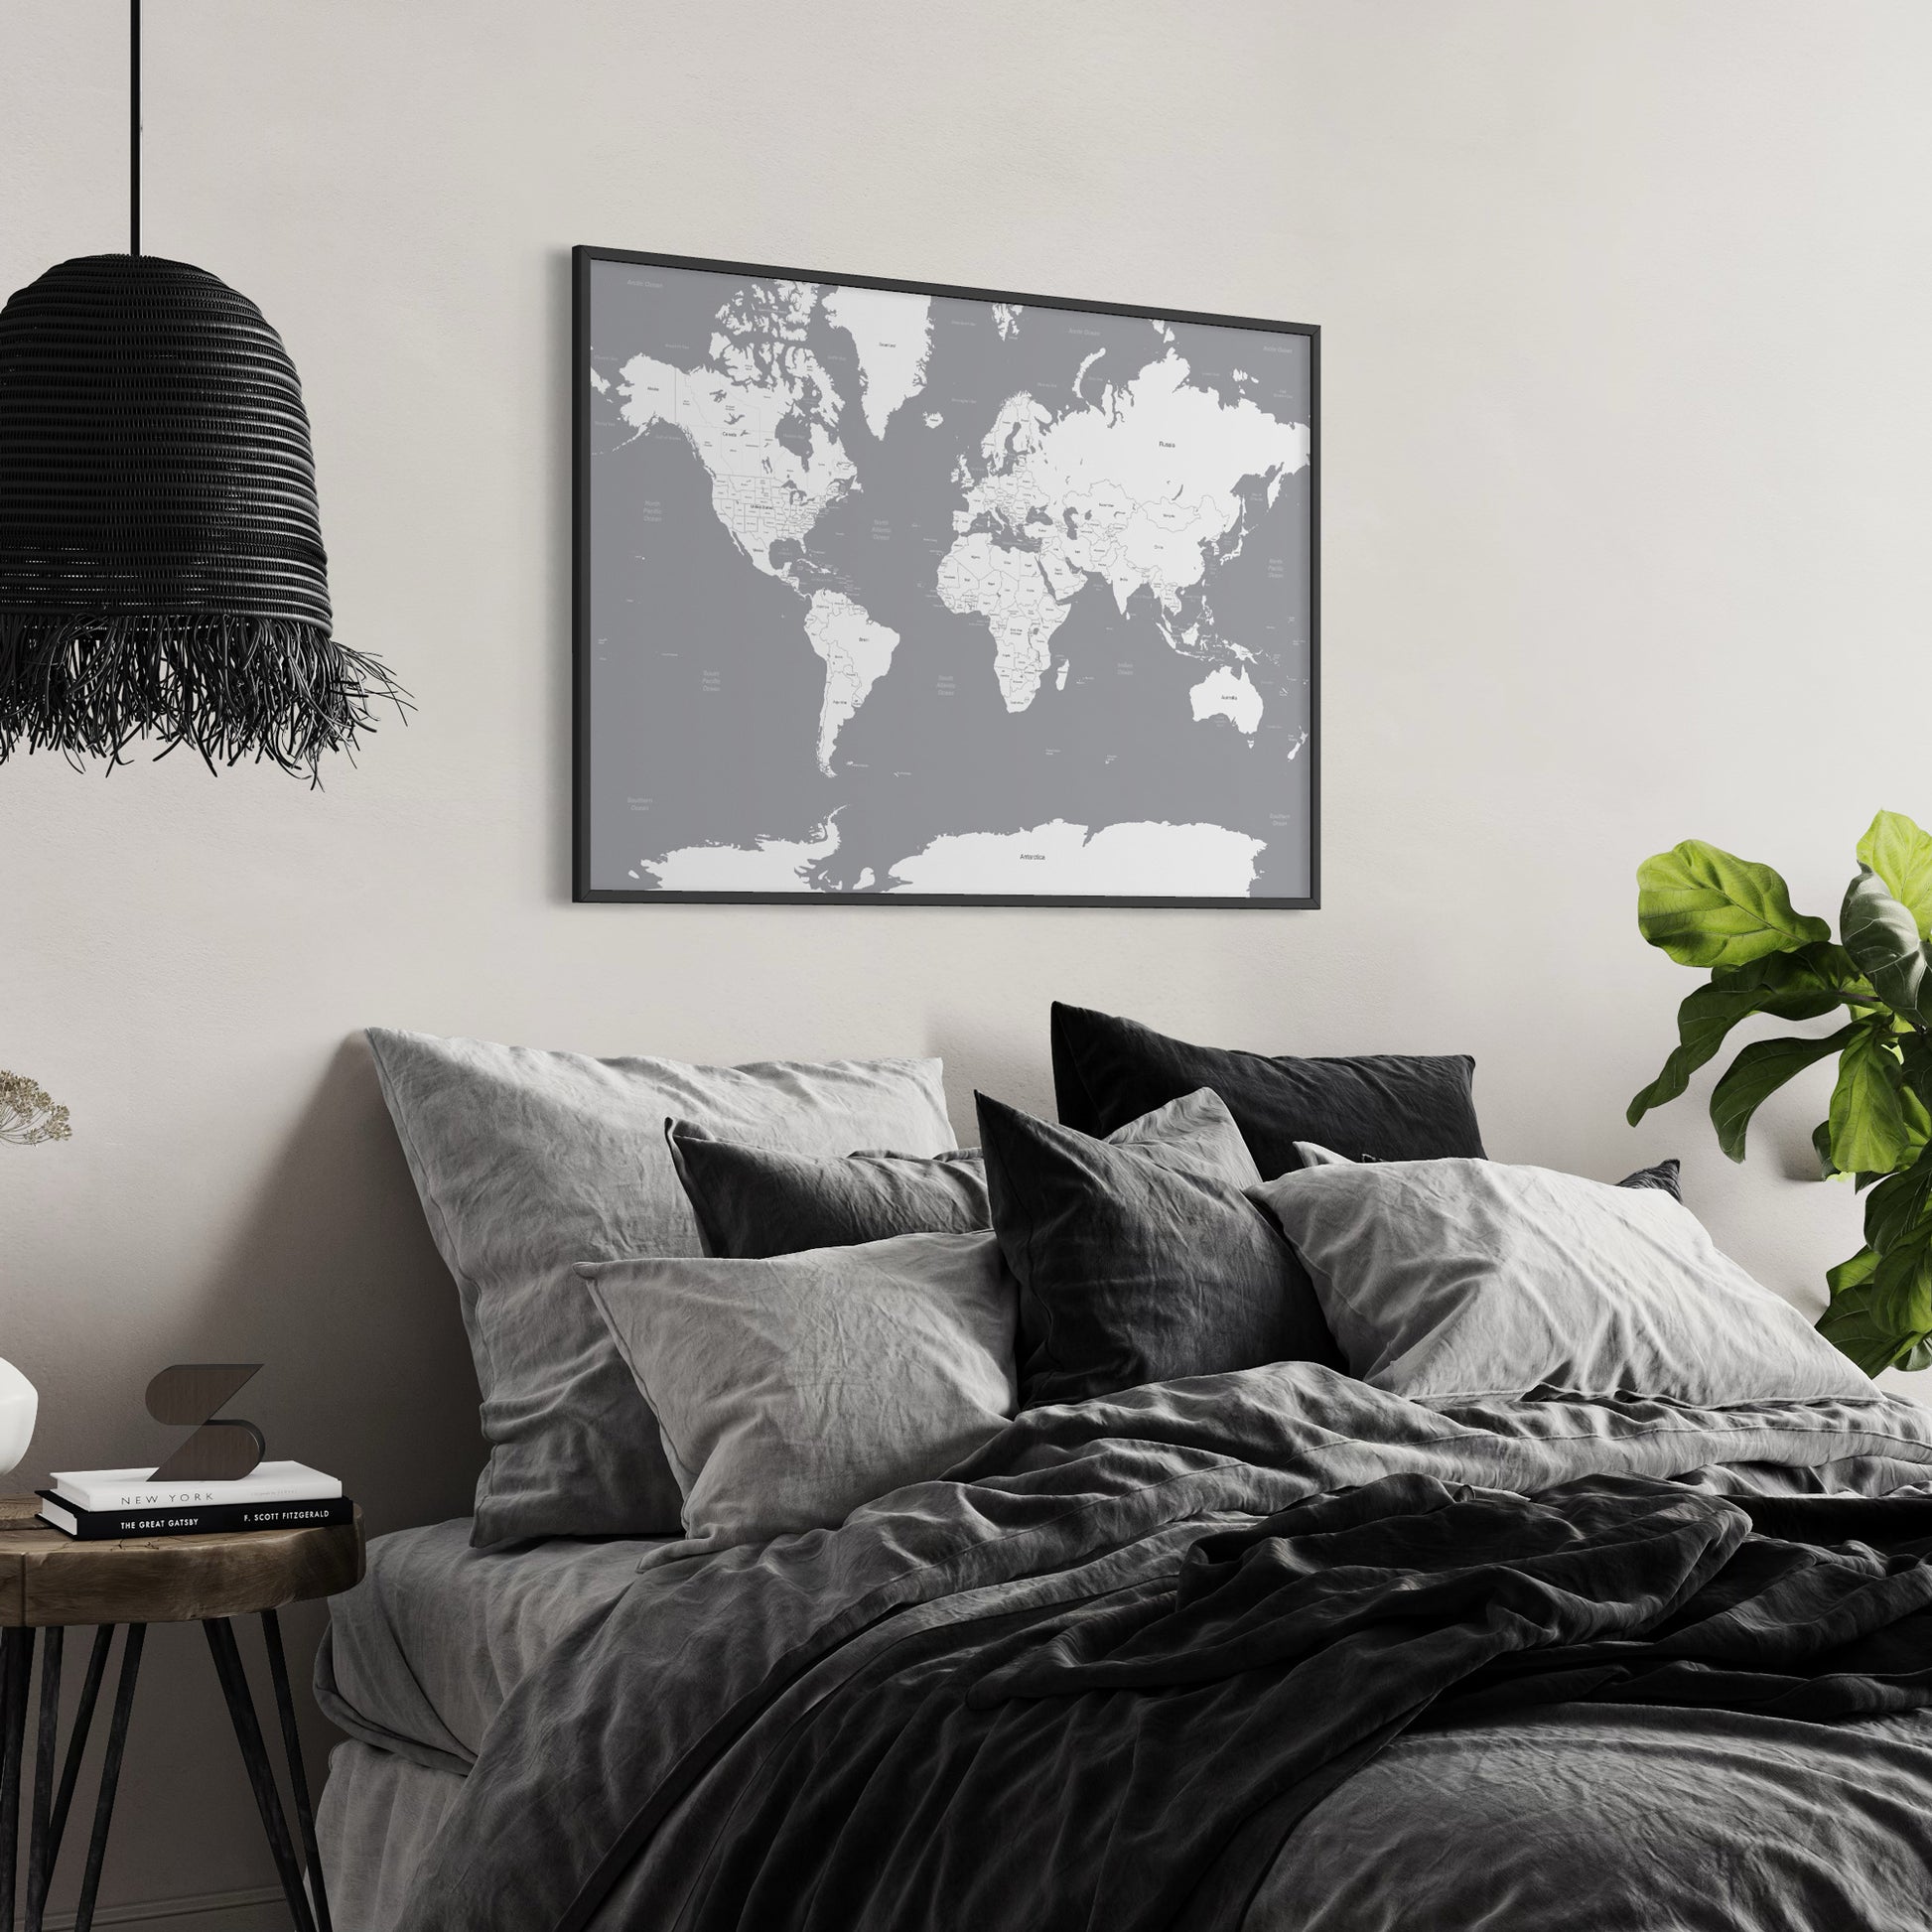 Grey and White World Map Poster Print on Wall Above Bed in Monotone Bedroom